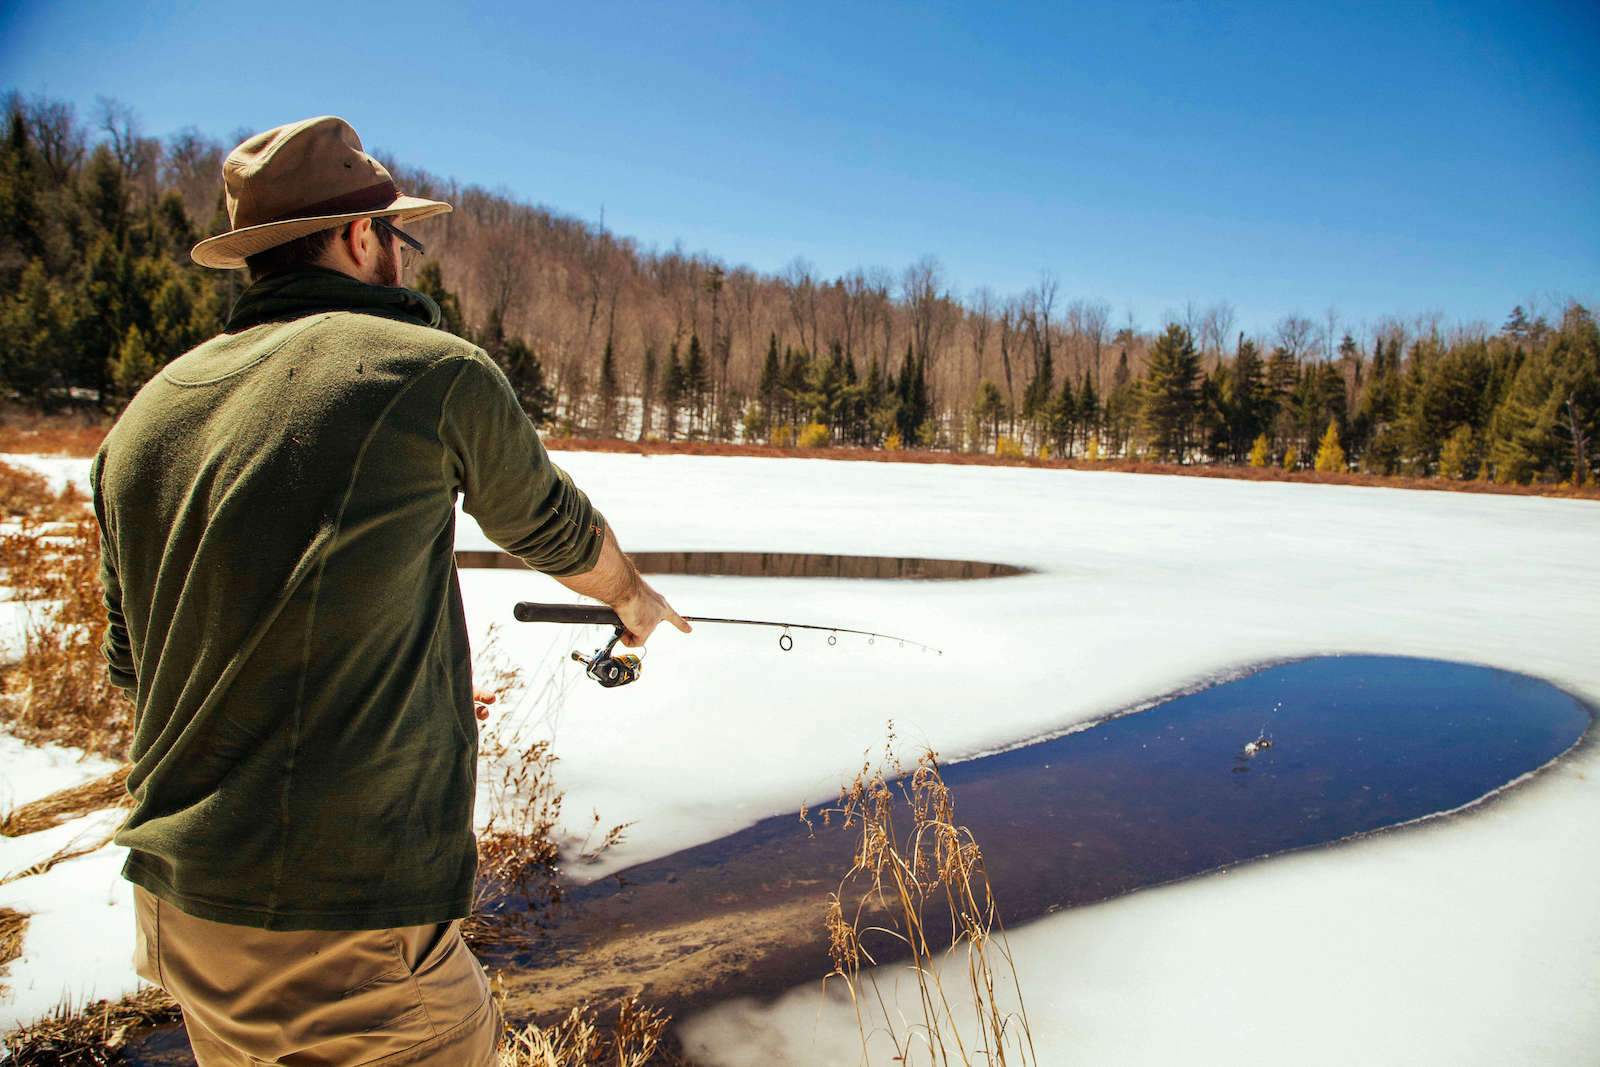 Unconventional Ice Fishing  Story By Valerie Manne – Pure Adirondacks